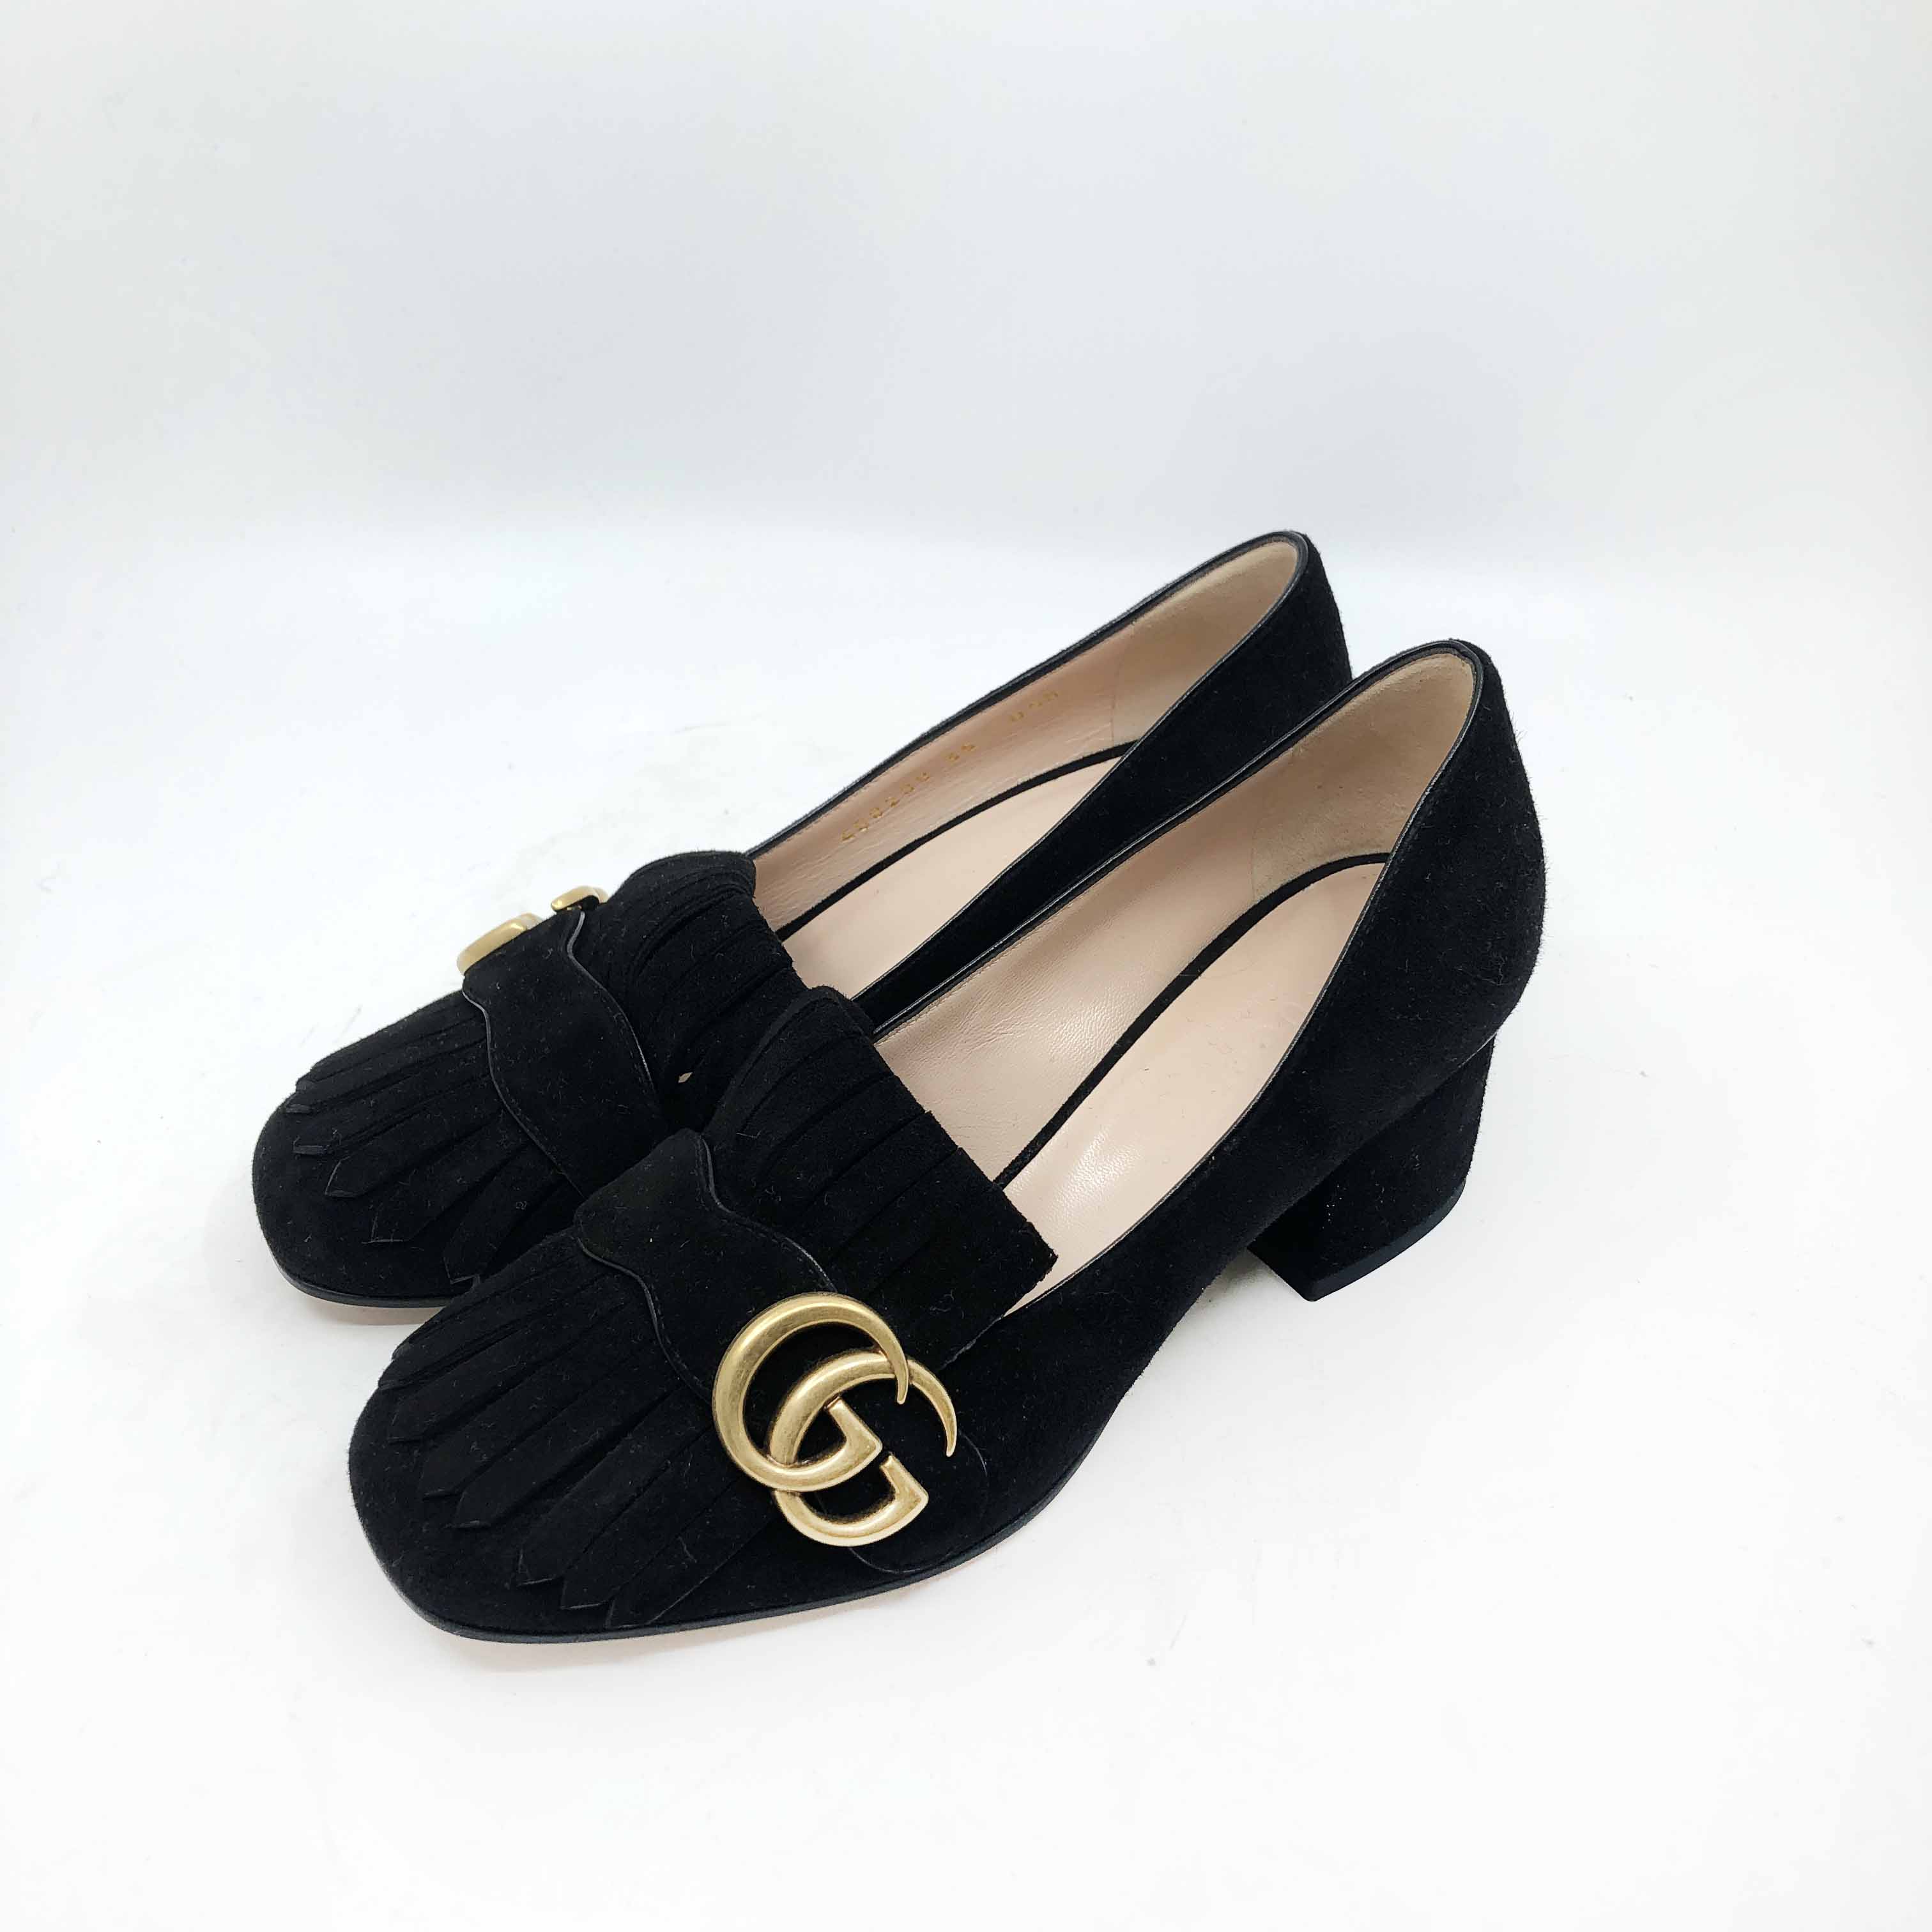 [Gucci] Marmont Mid-Heel Suede Pumps - Size 35